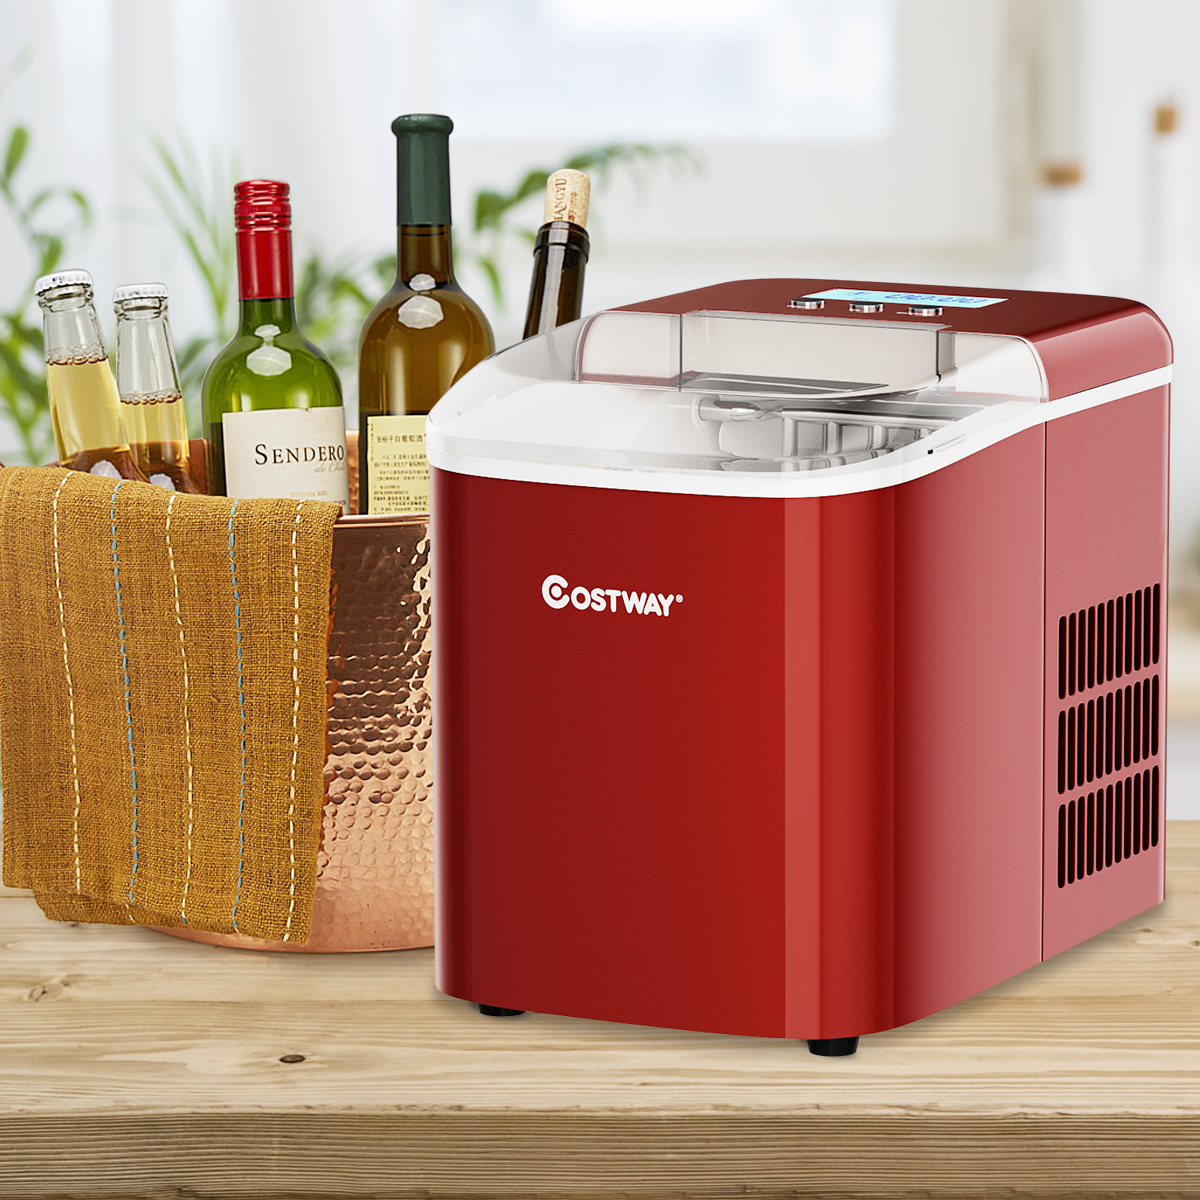 Costway Portable Ice Maker Machine Countertop 26LBS/24H LCD Display w/Ice Scoop Red